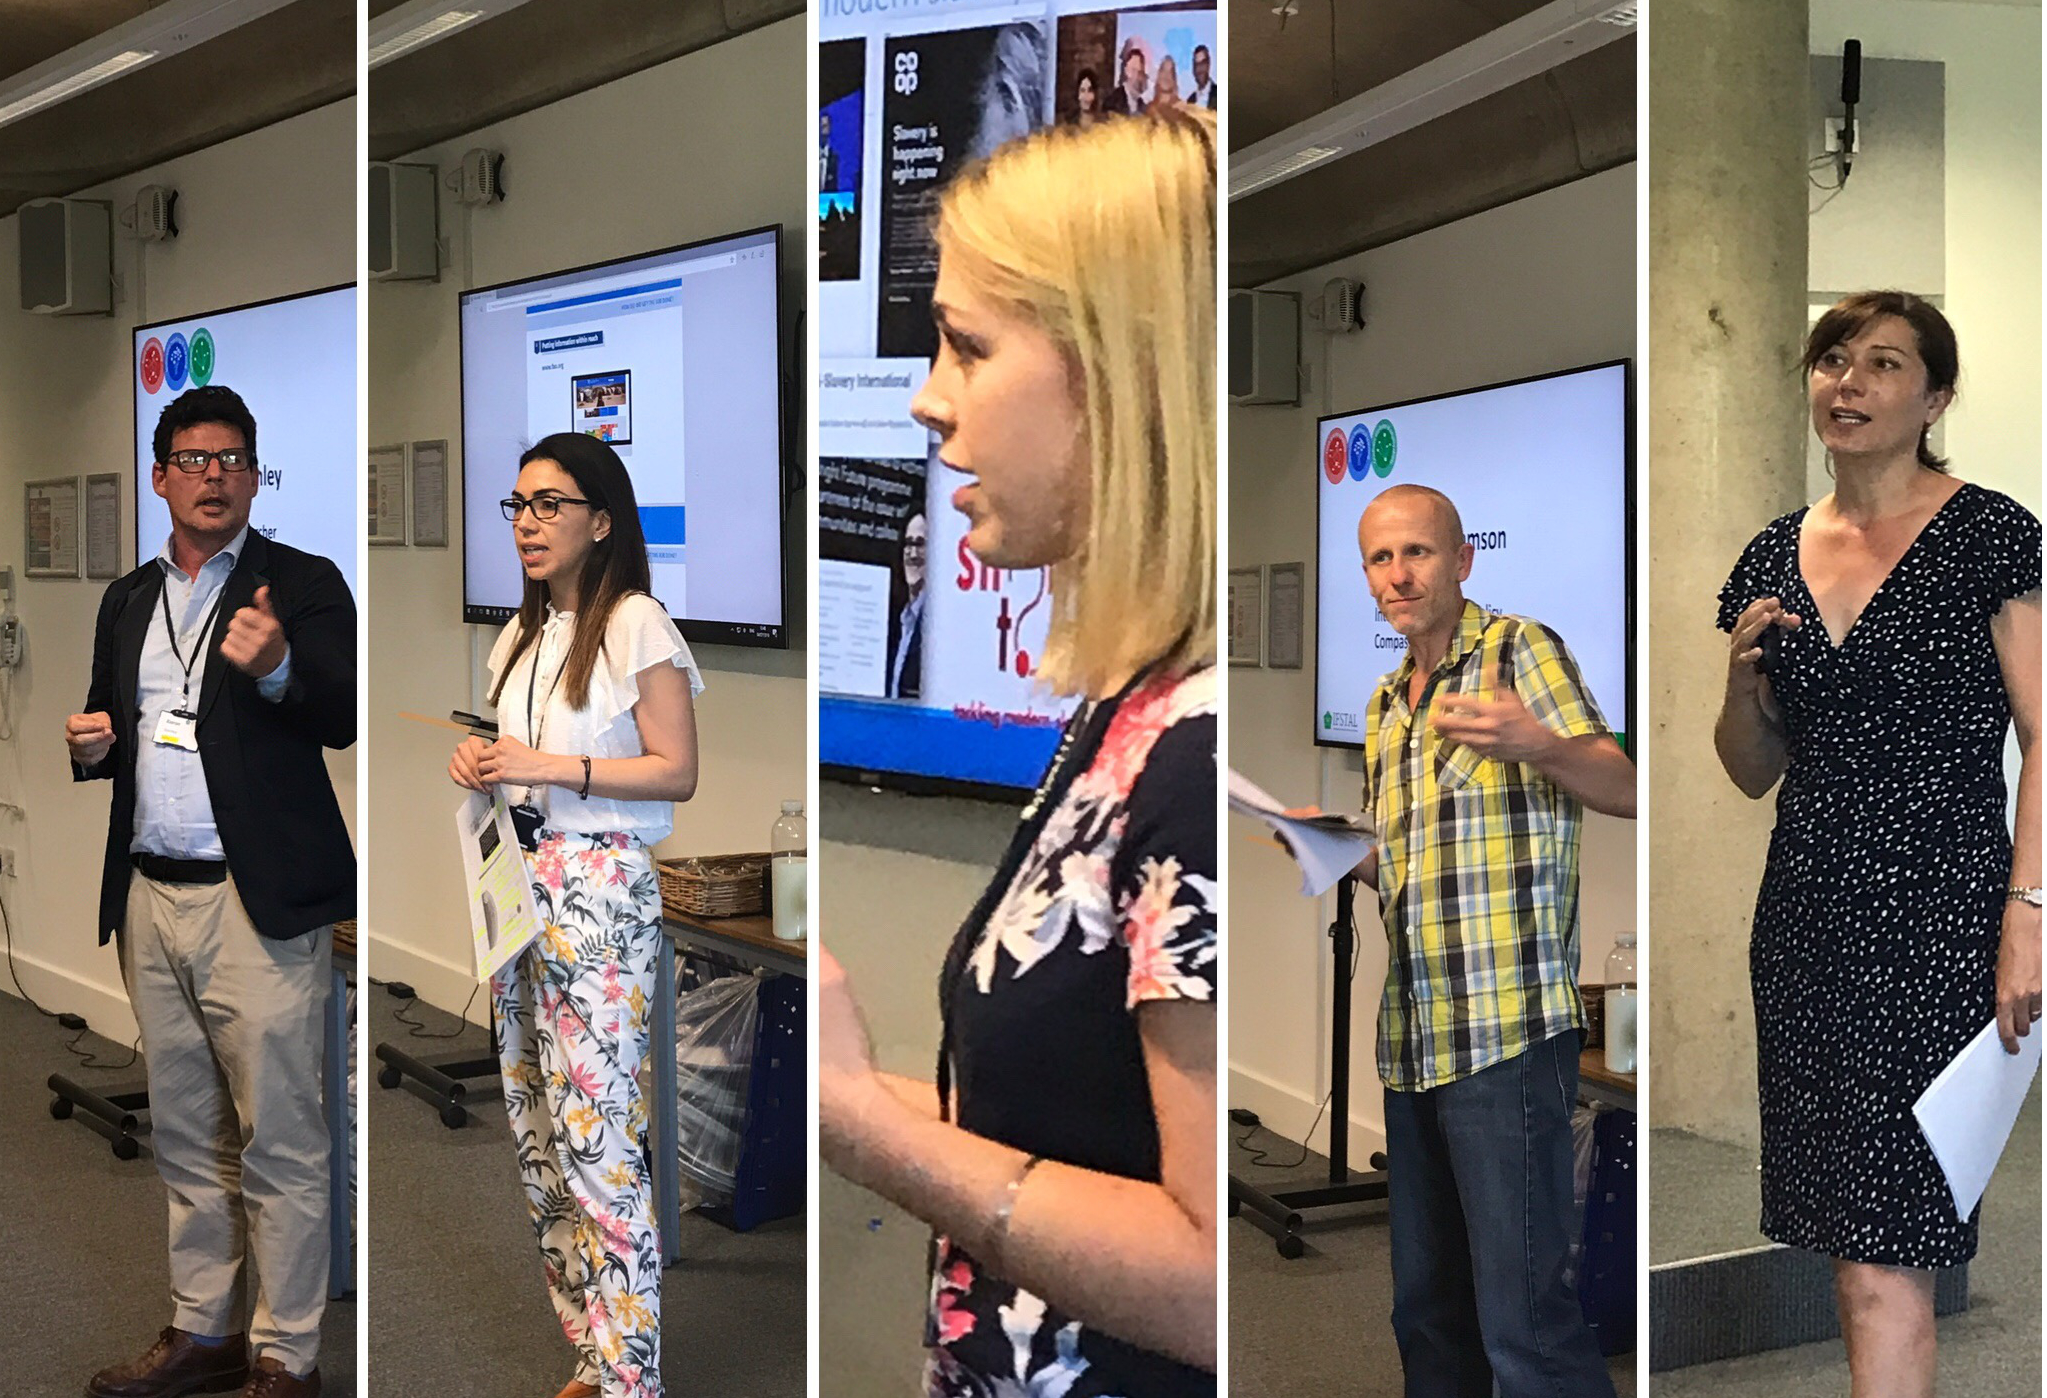 Summer school day 5 – Workplace speakers on collaboration, communication and connection